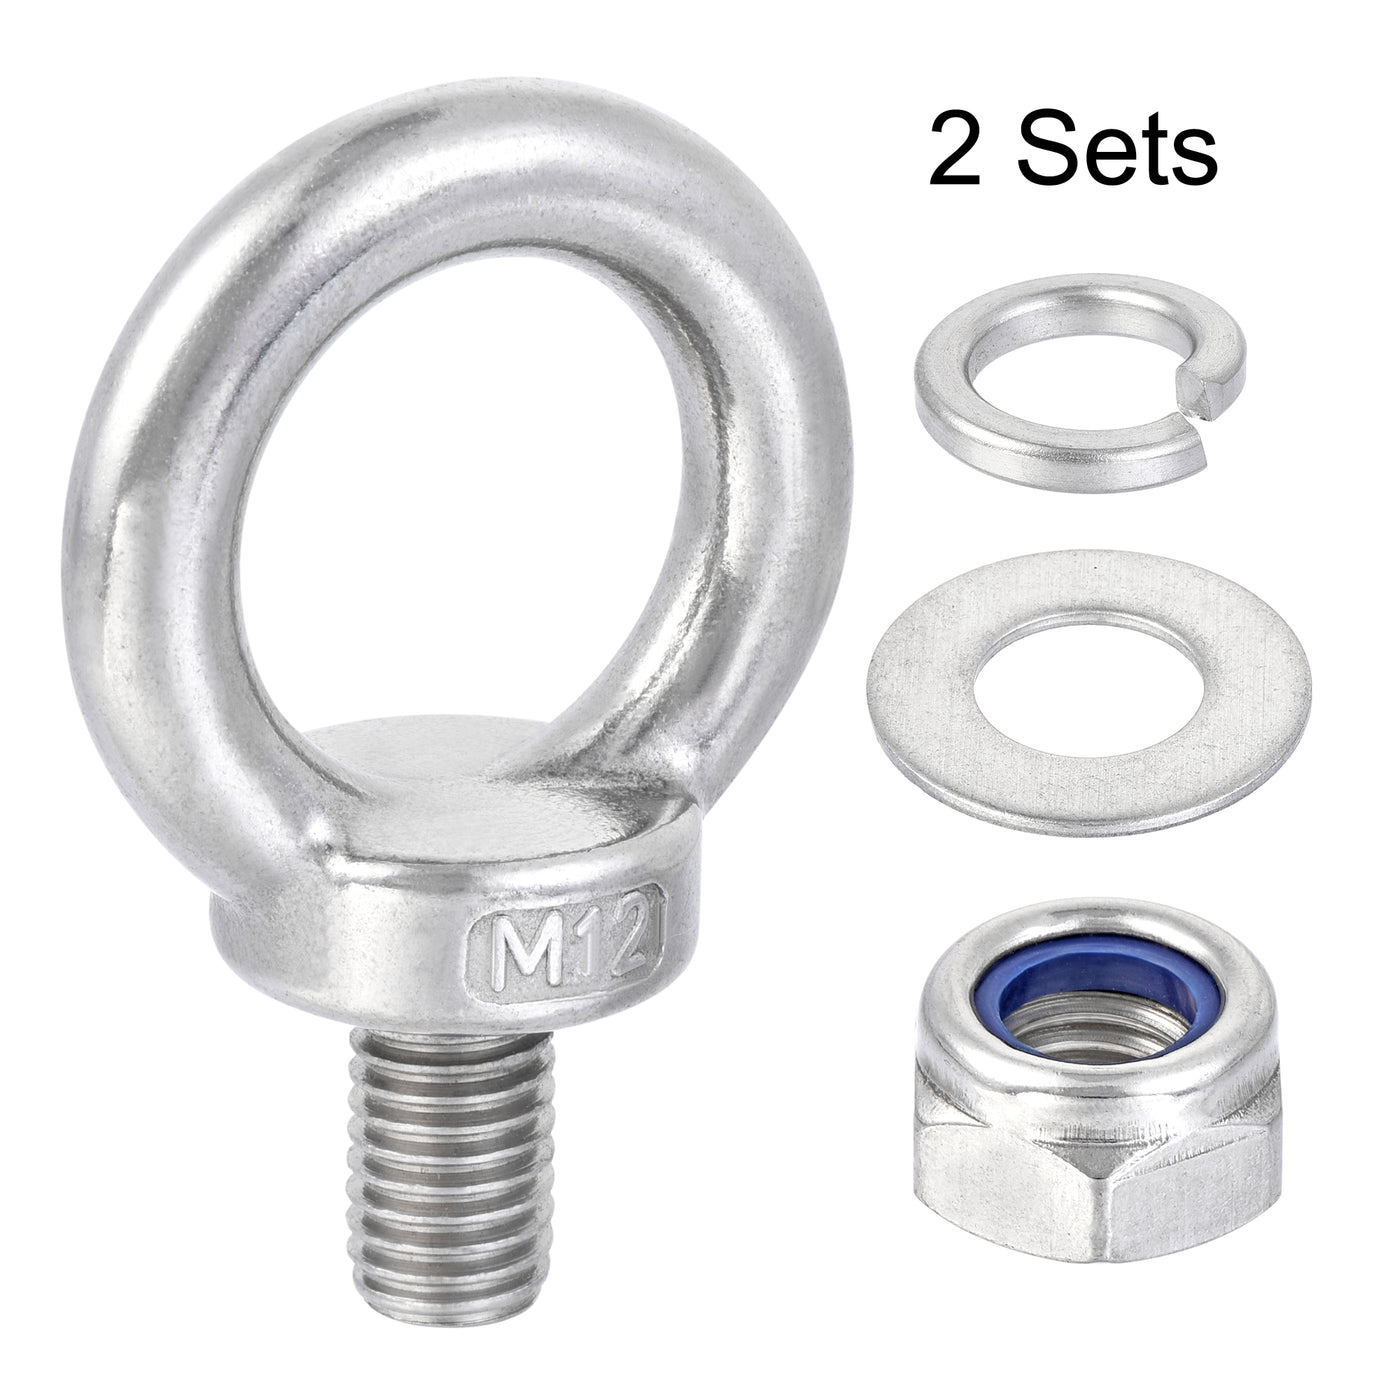 uxcell Uxcell Lifting Eye Bolt M12 x 20mm Male Thread with Hex Screw Nut Gasket Flat Washer for Hanging, 304 Stainless Steel, 2 Sets